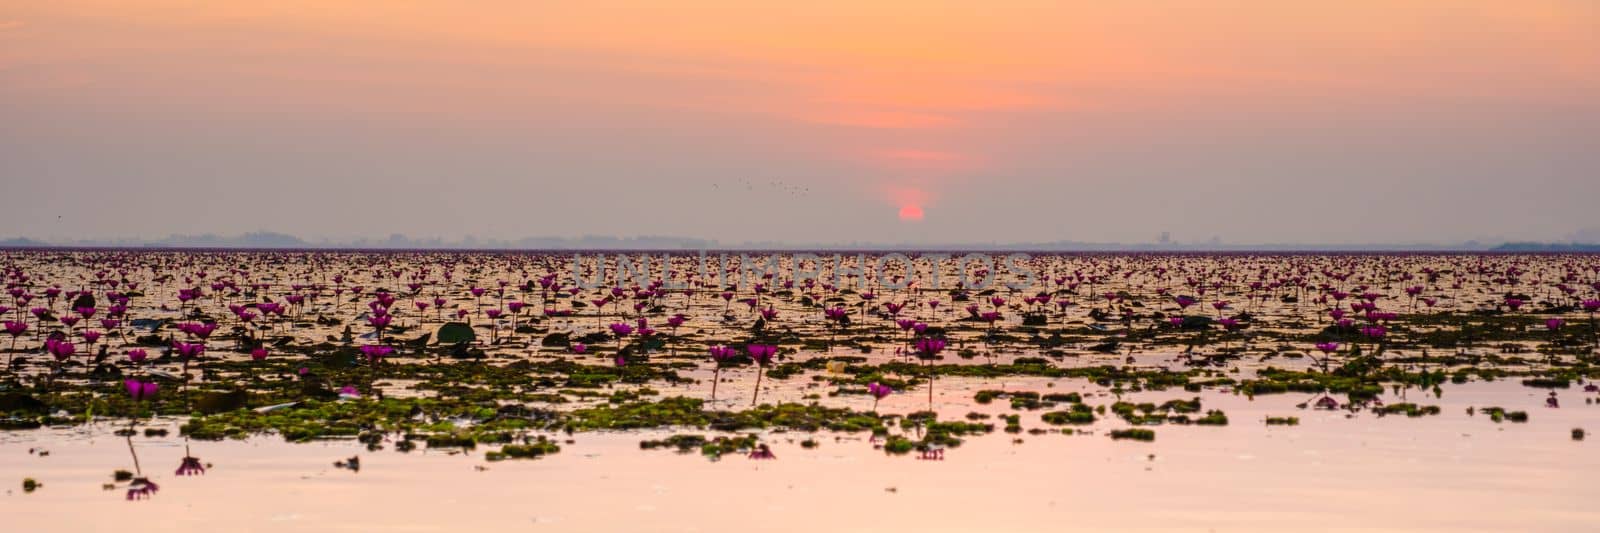 Red Lotus Sea Kumphawapi full of pink flowers in Udon Thani in northern Thailand. by fokkebok